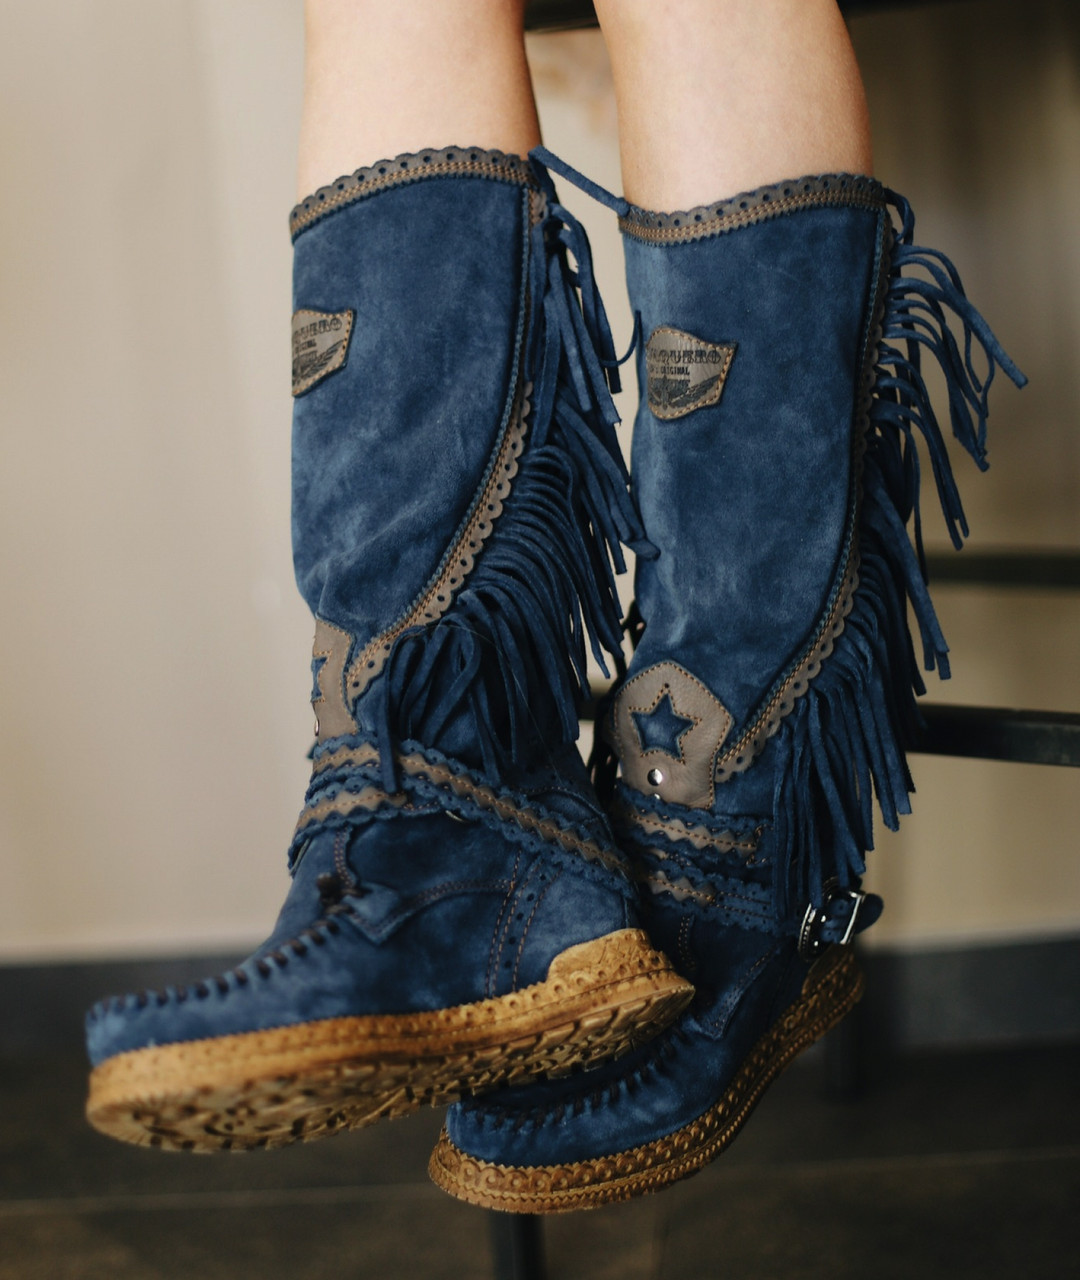 moccasin boot